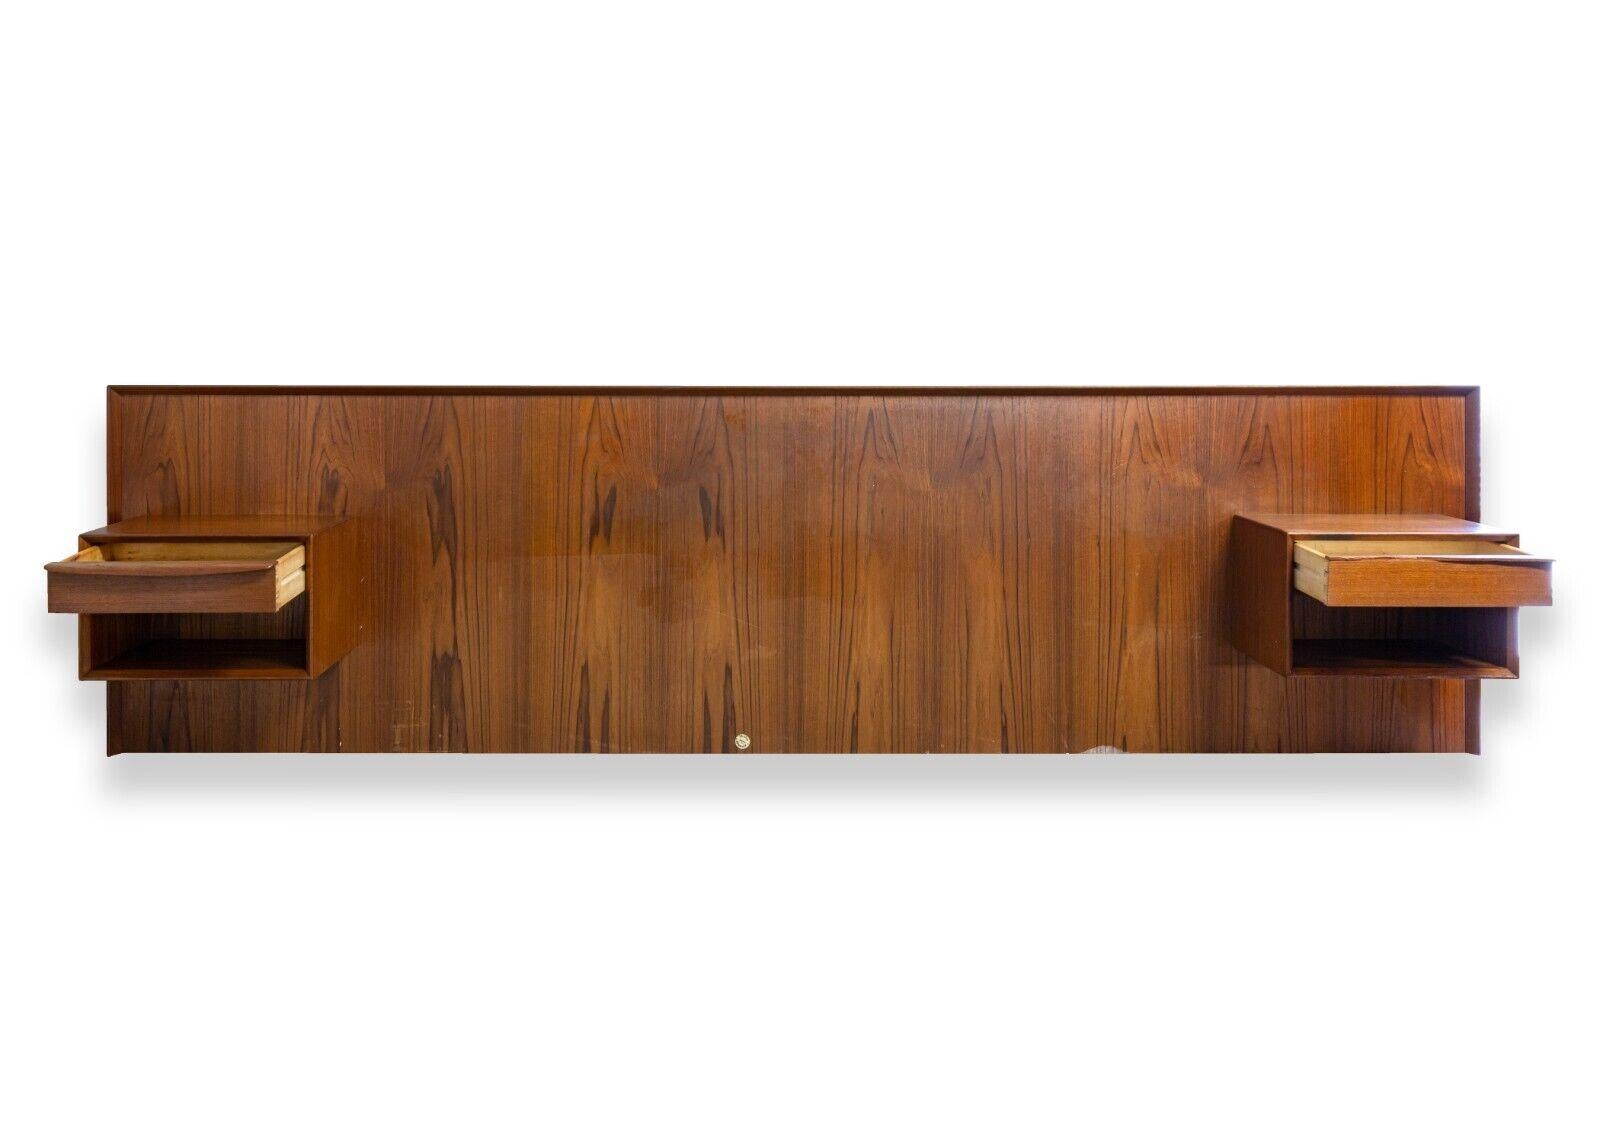 A mid century modern Danish teak queen headboard with floating nightstands. This beautifully crafted headboard is from Danish brand Falster. This piece is made from a gorgeous teak wood with a very detailed wood grain, featuring two floating